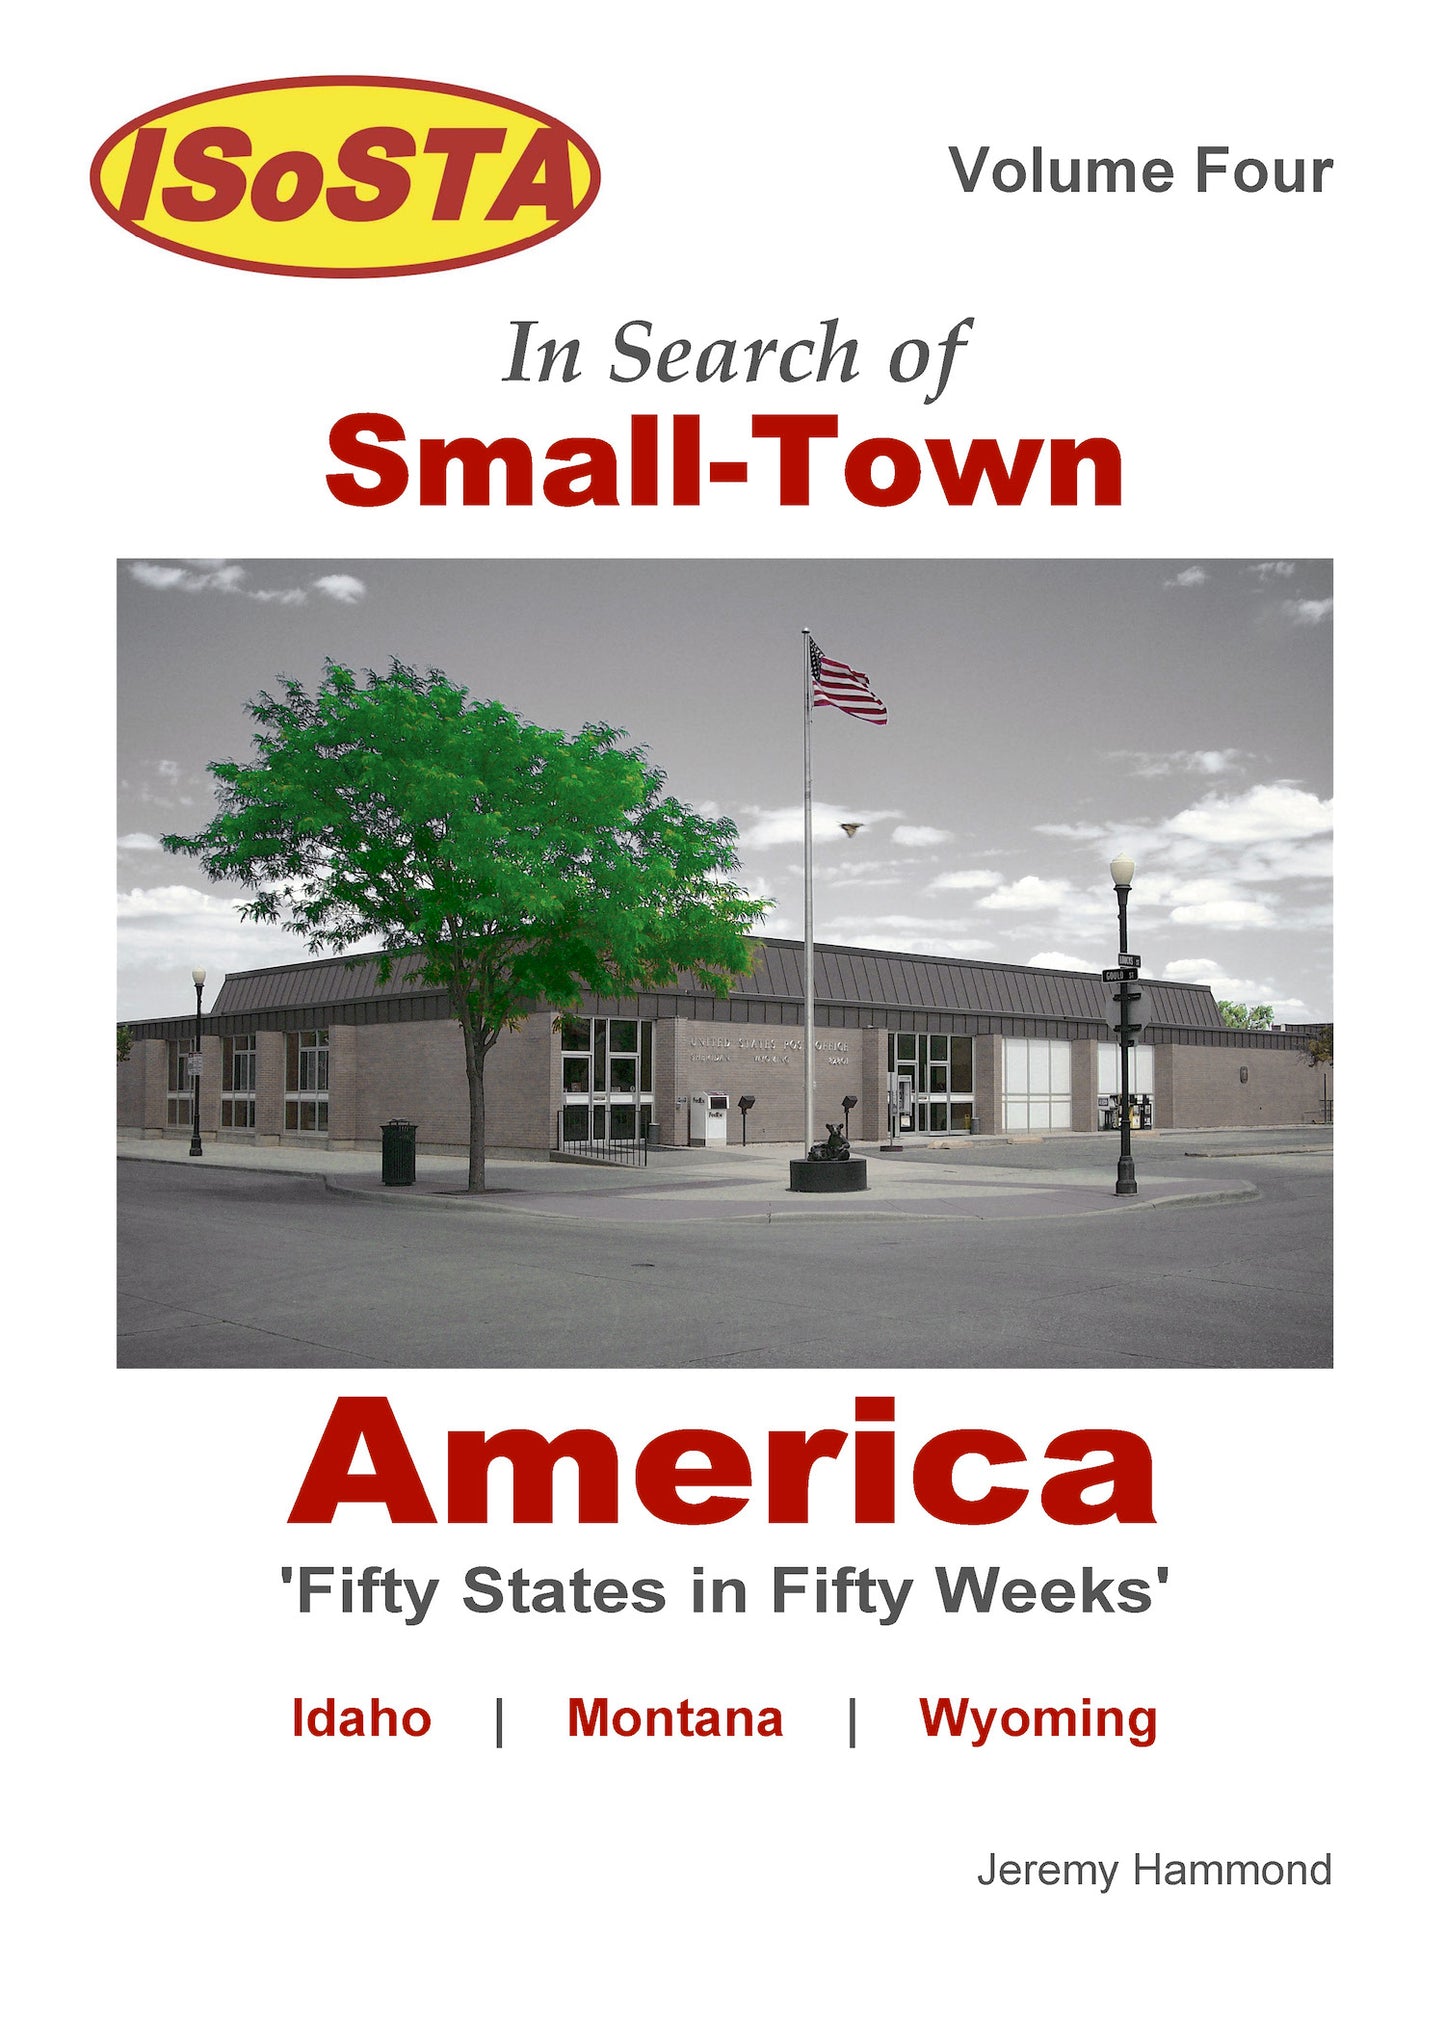 In Search of Small-Town America: Volume 4